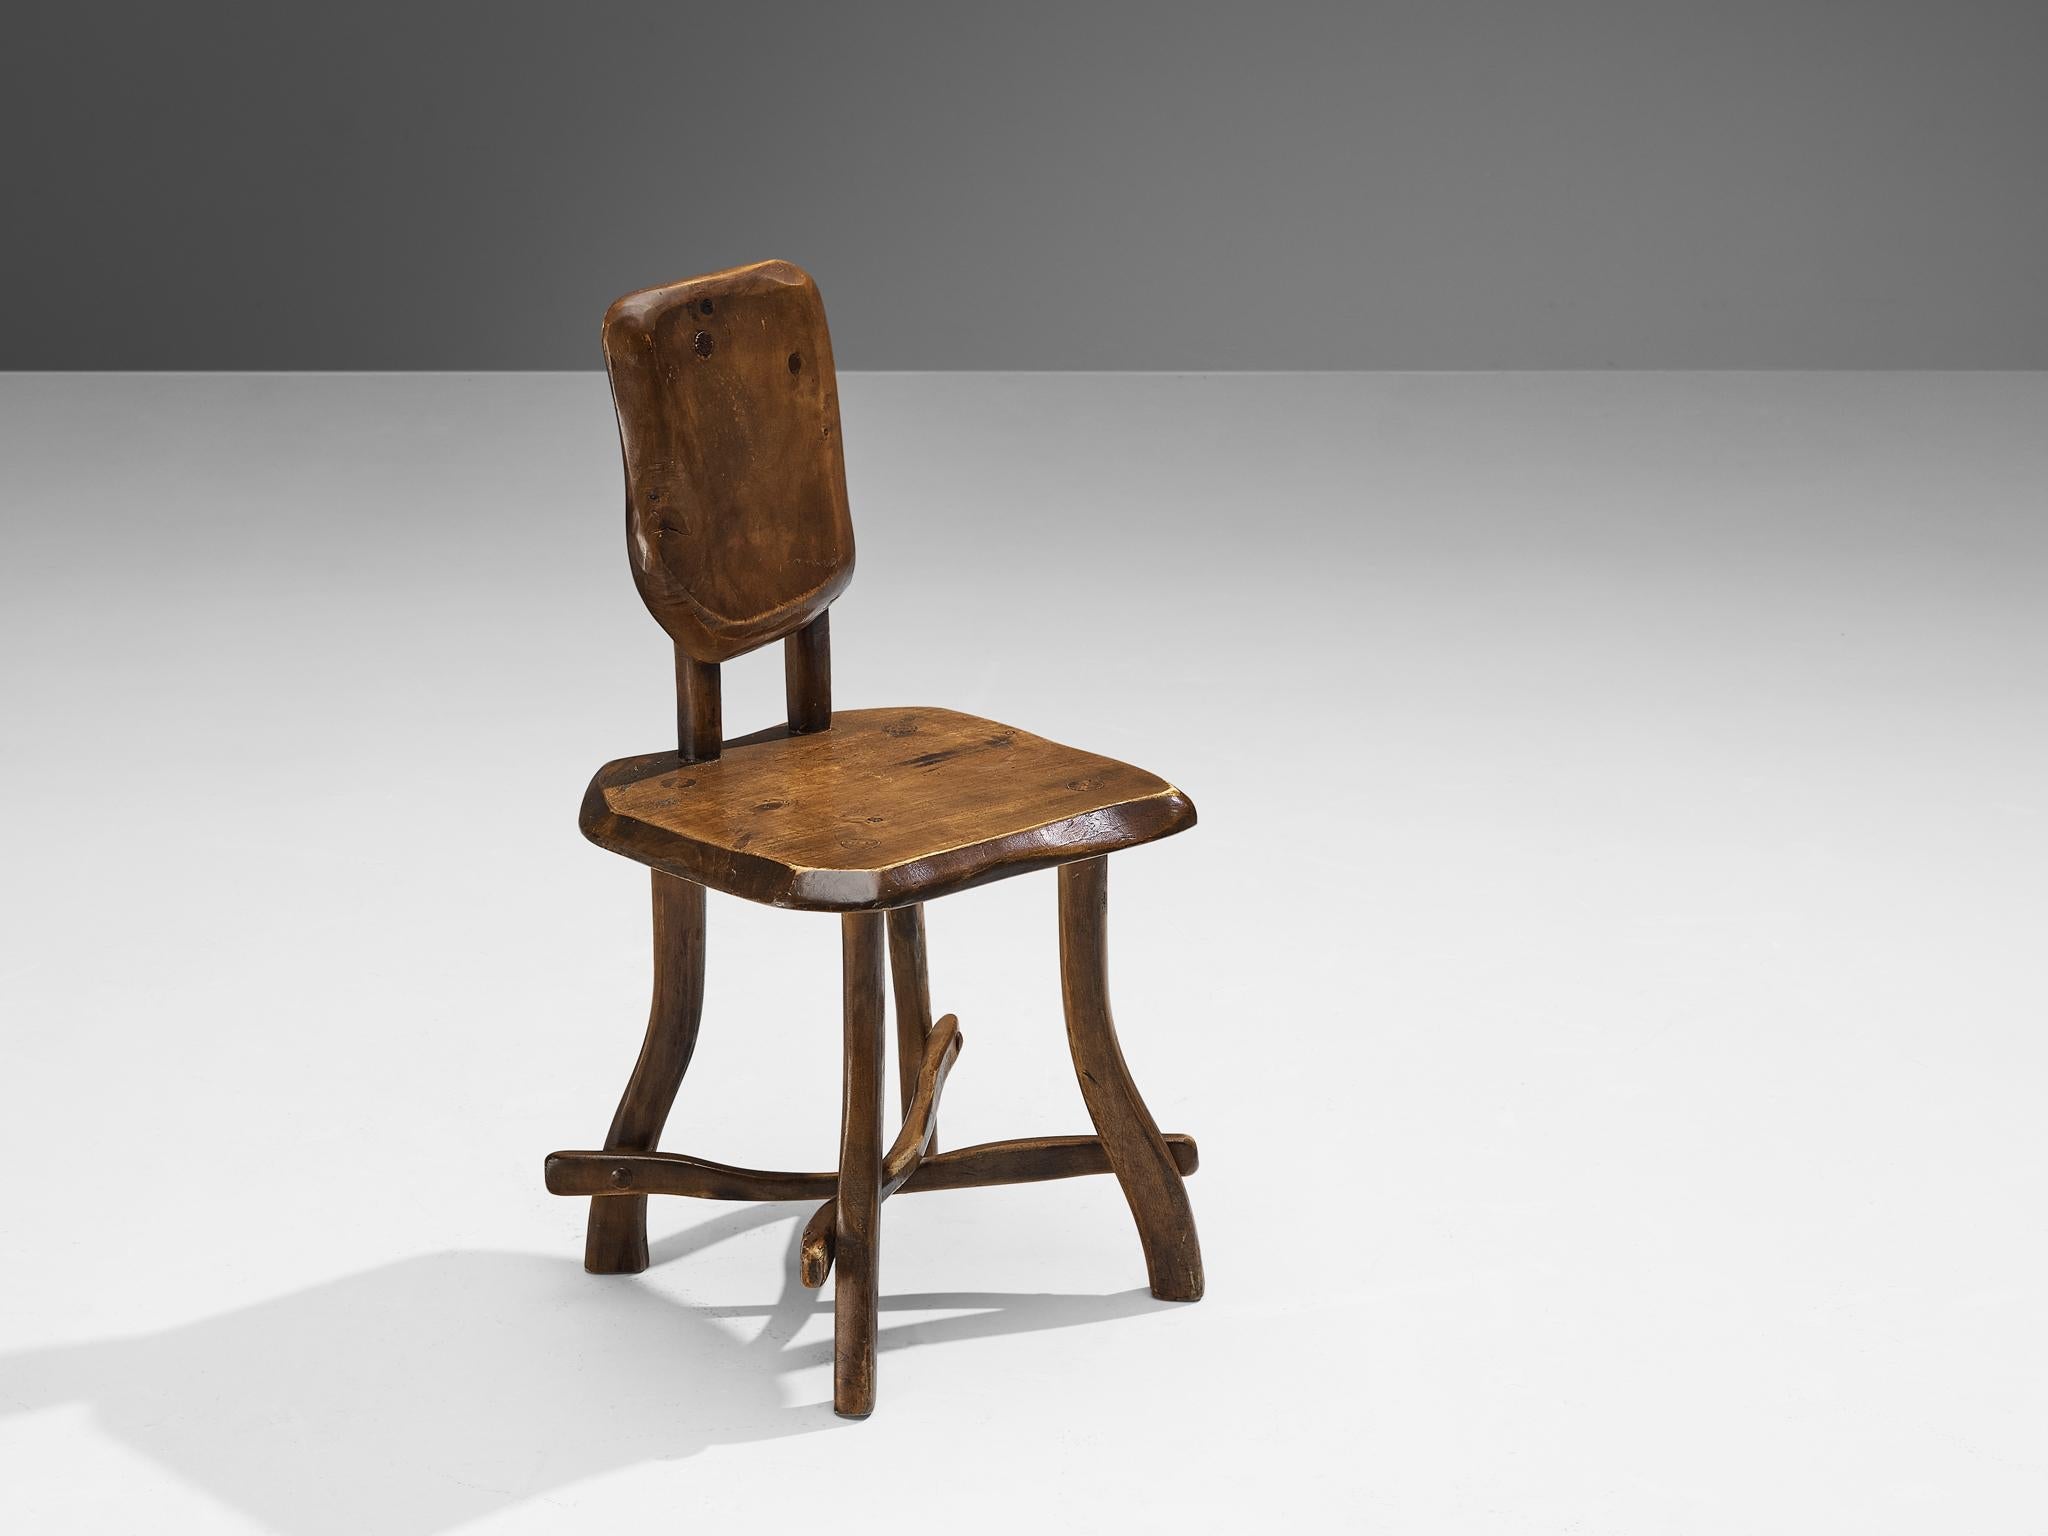 Organic Brutalist Chair and Stool in Maple